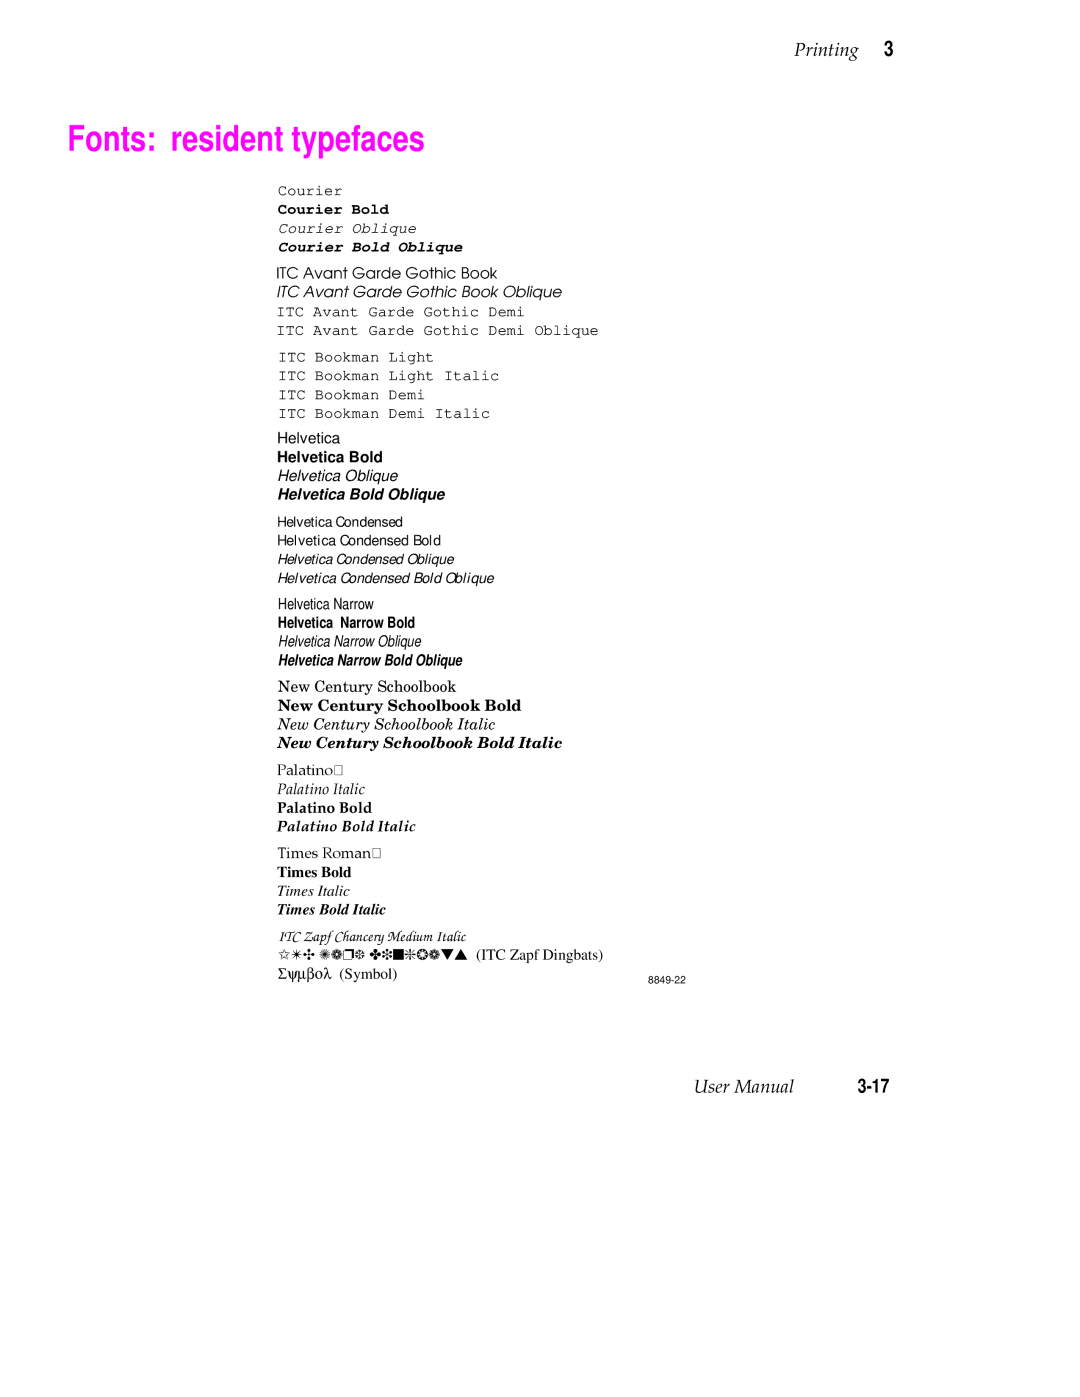 Tektronix 480X user manual Fonts resident typefaces, Helvetica Bold, Helvetica Condensed Bold, Helvetica Narrow Bold 